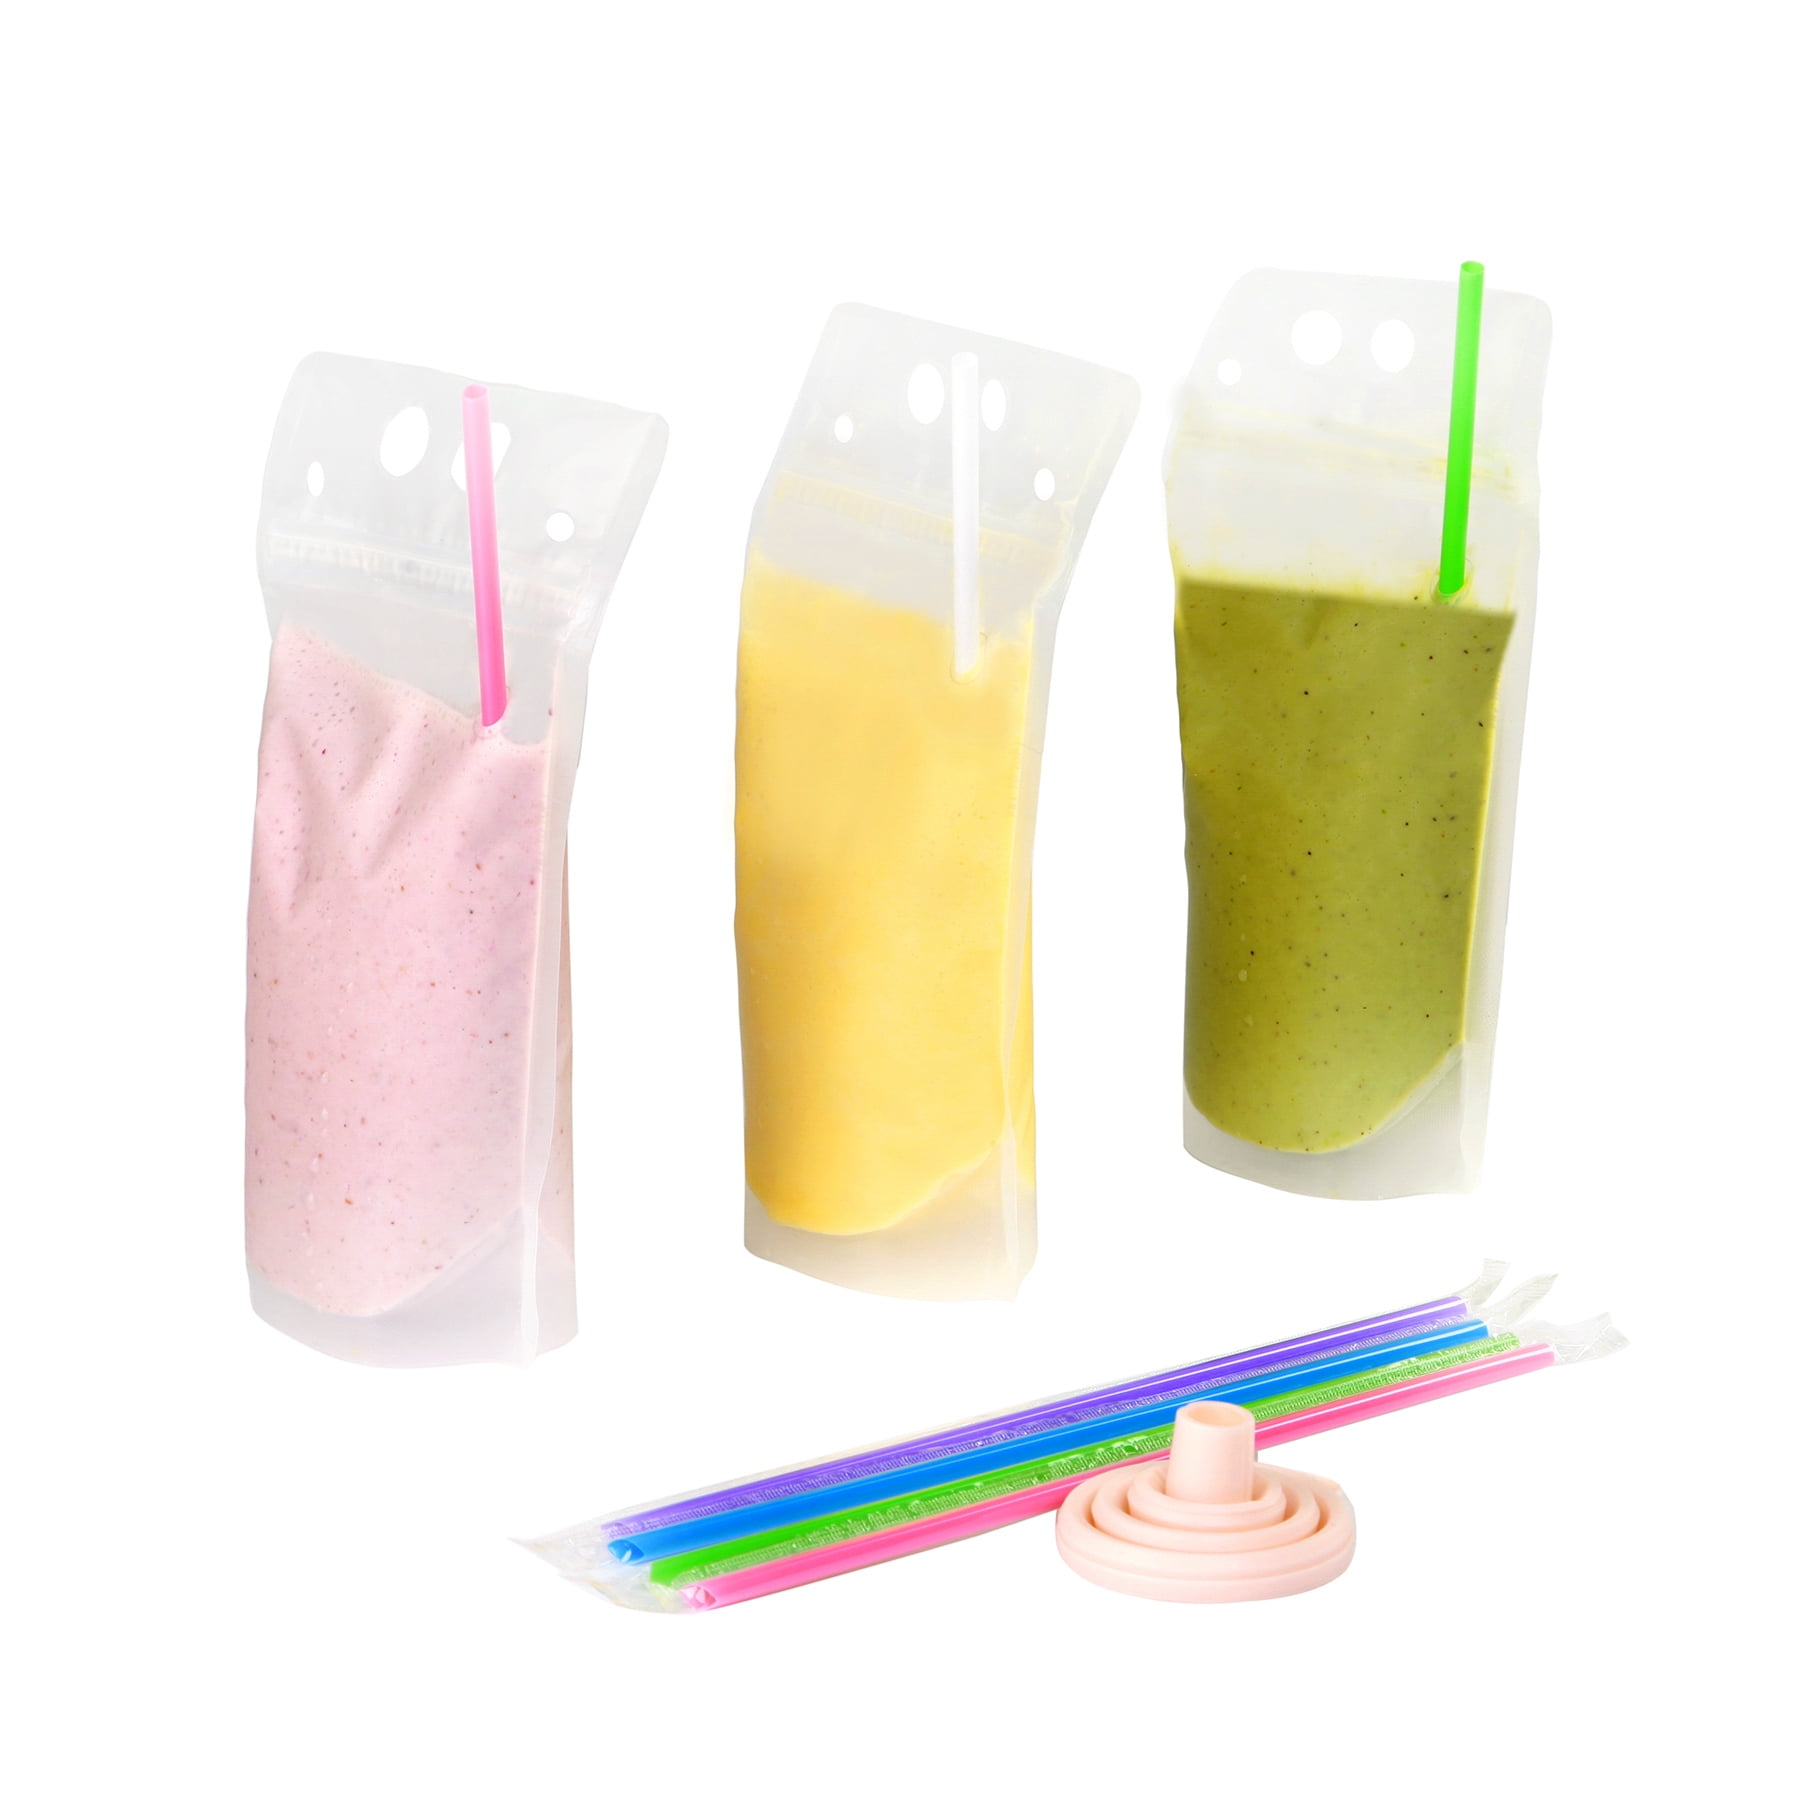 100 Drink Pouches Reusable Juice Smoothie Stand Up Zipper Bags